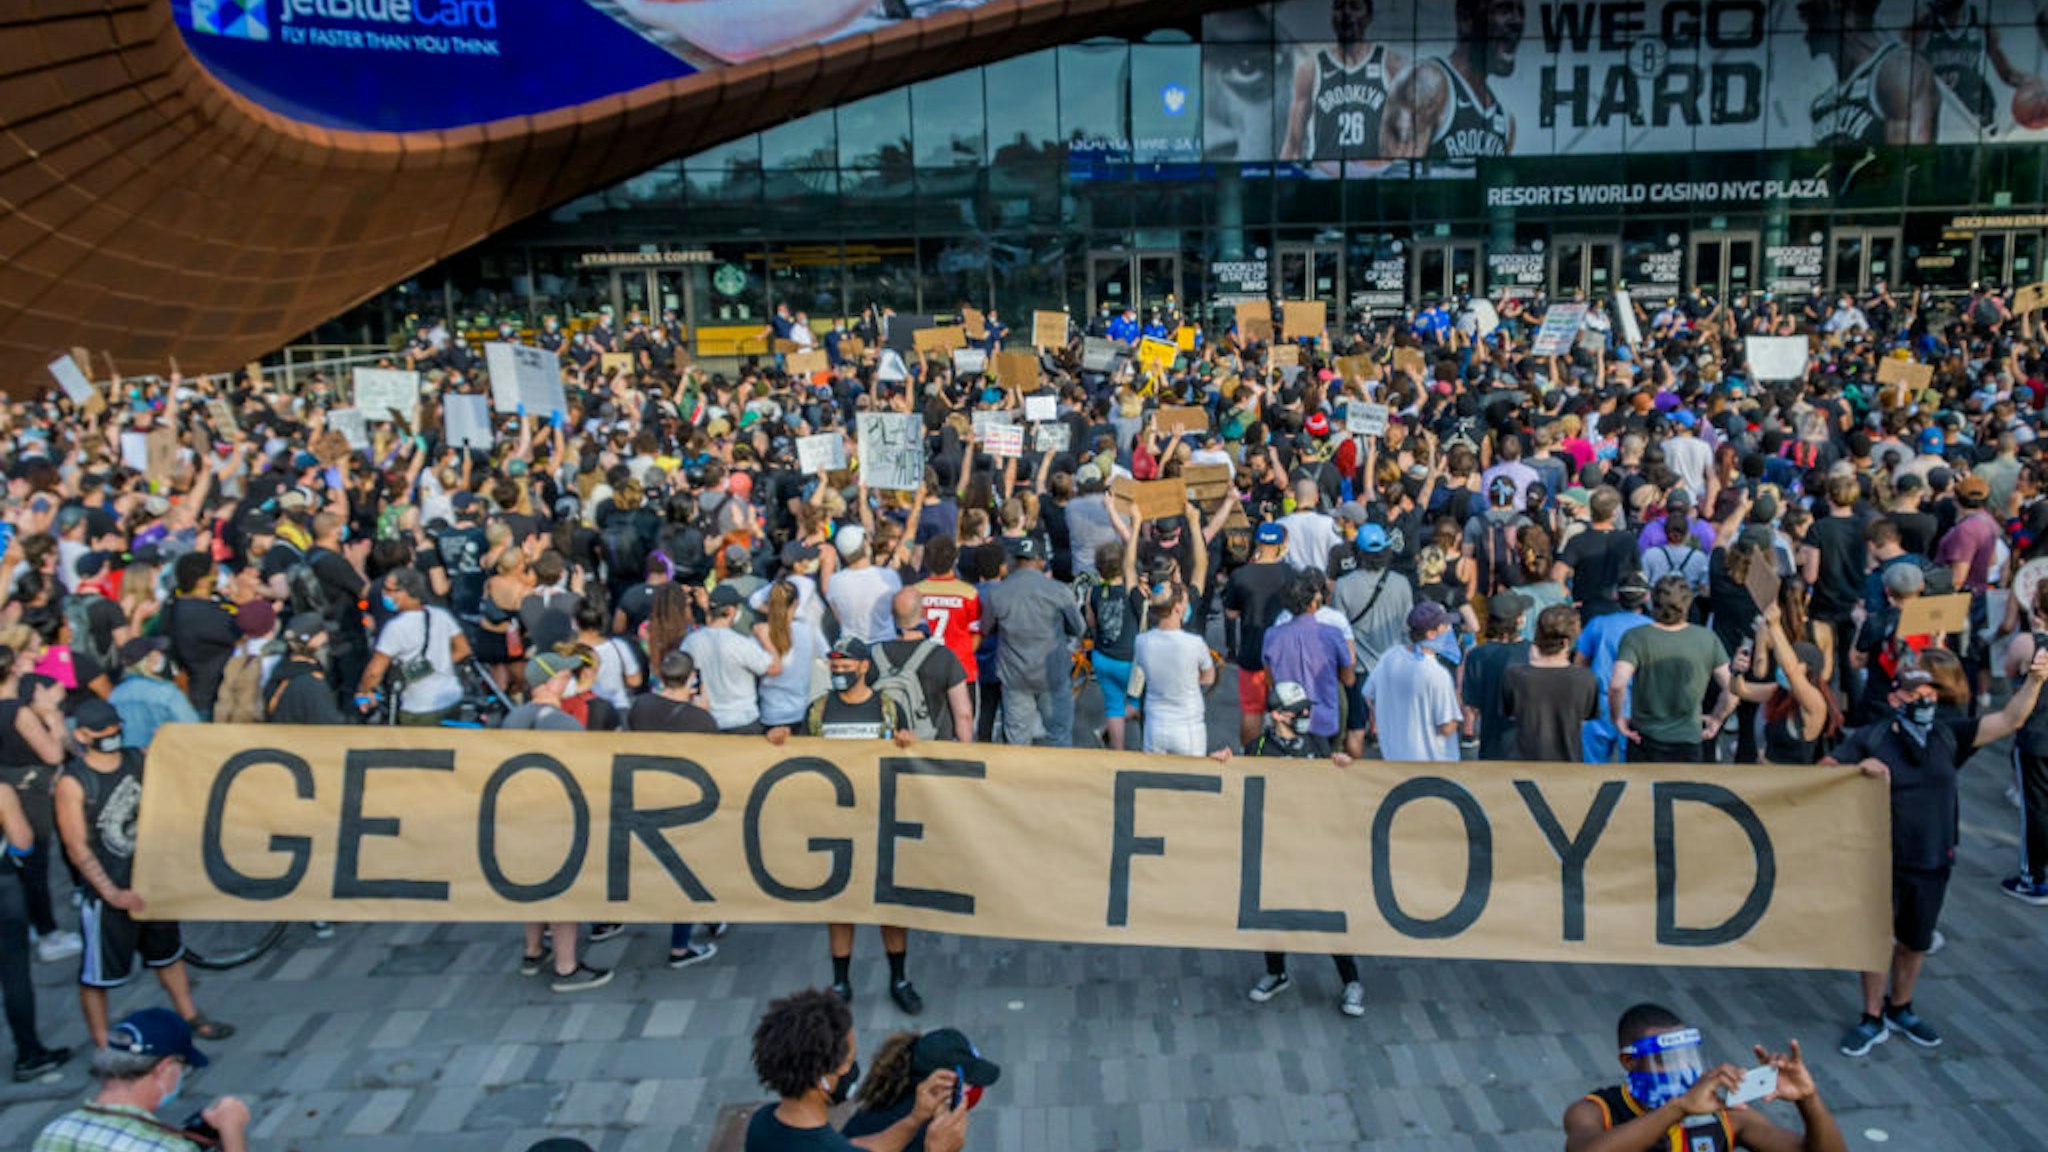 Protesters holding a giant banner reading GEORGE FLOYD outside the Barclays Center. Hundreds of protesters made their way toward Barclays Center in Brooklyn to demonstrate against police brutality in the wake of George Floyd's death while in police custody in Minneapolis.